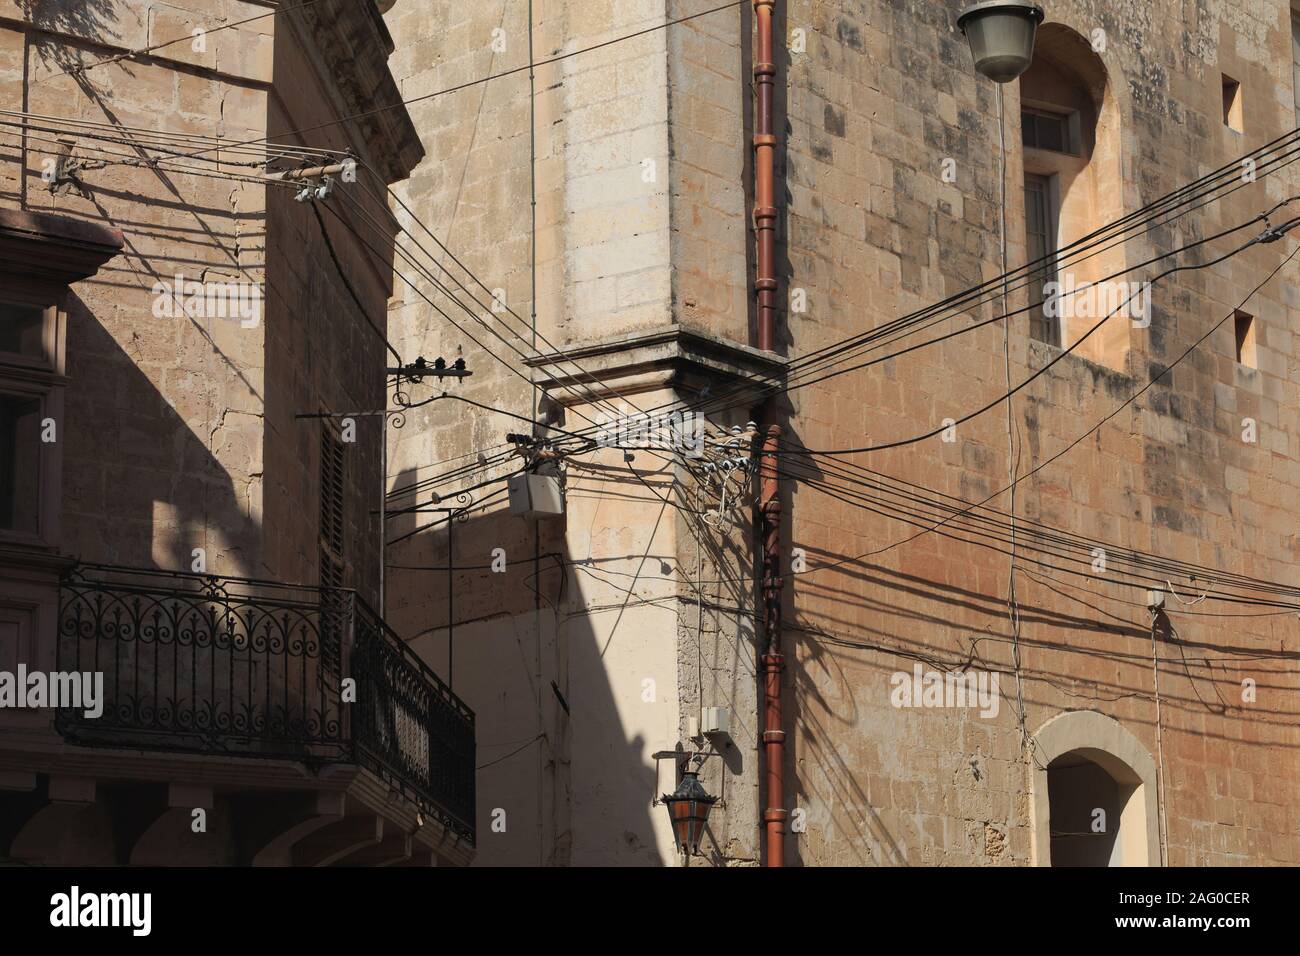 Messy electrical cables on buildings in Malta close up view Stock Photo